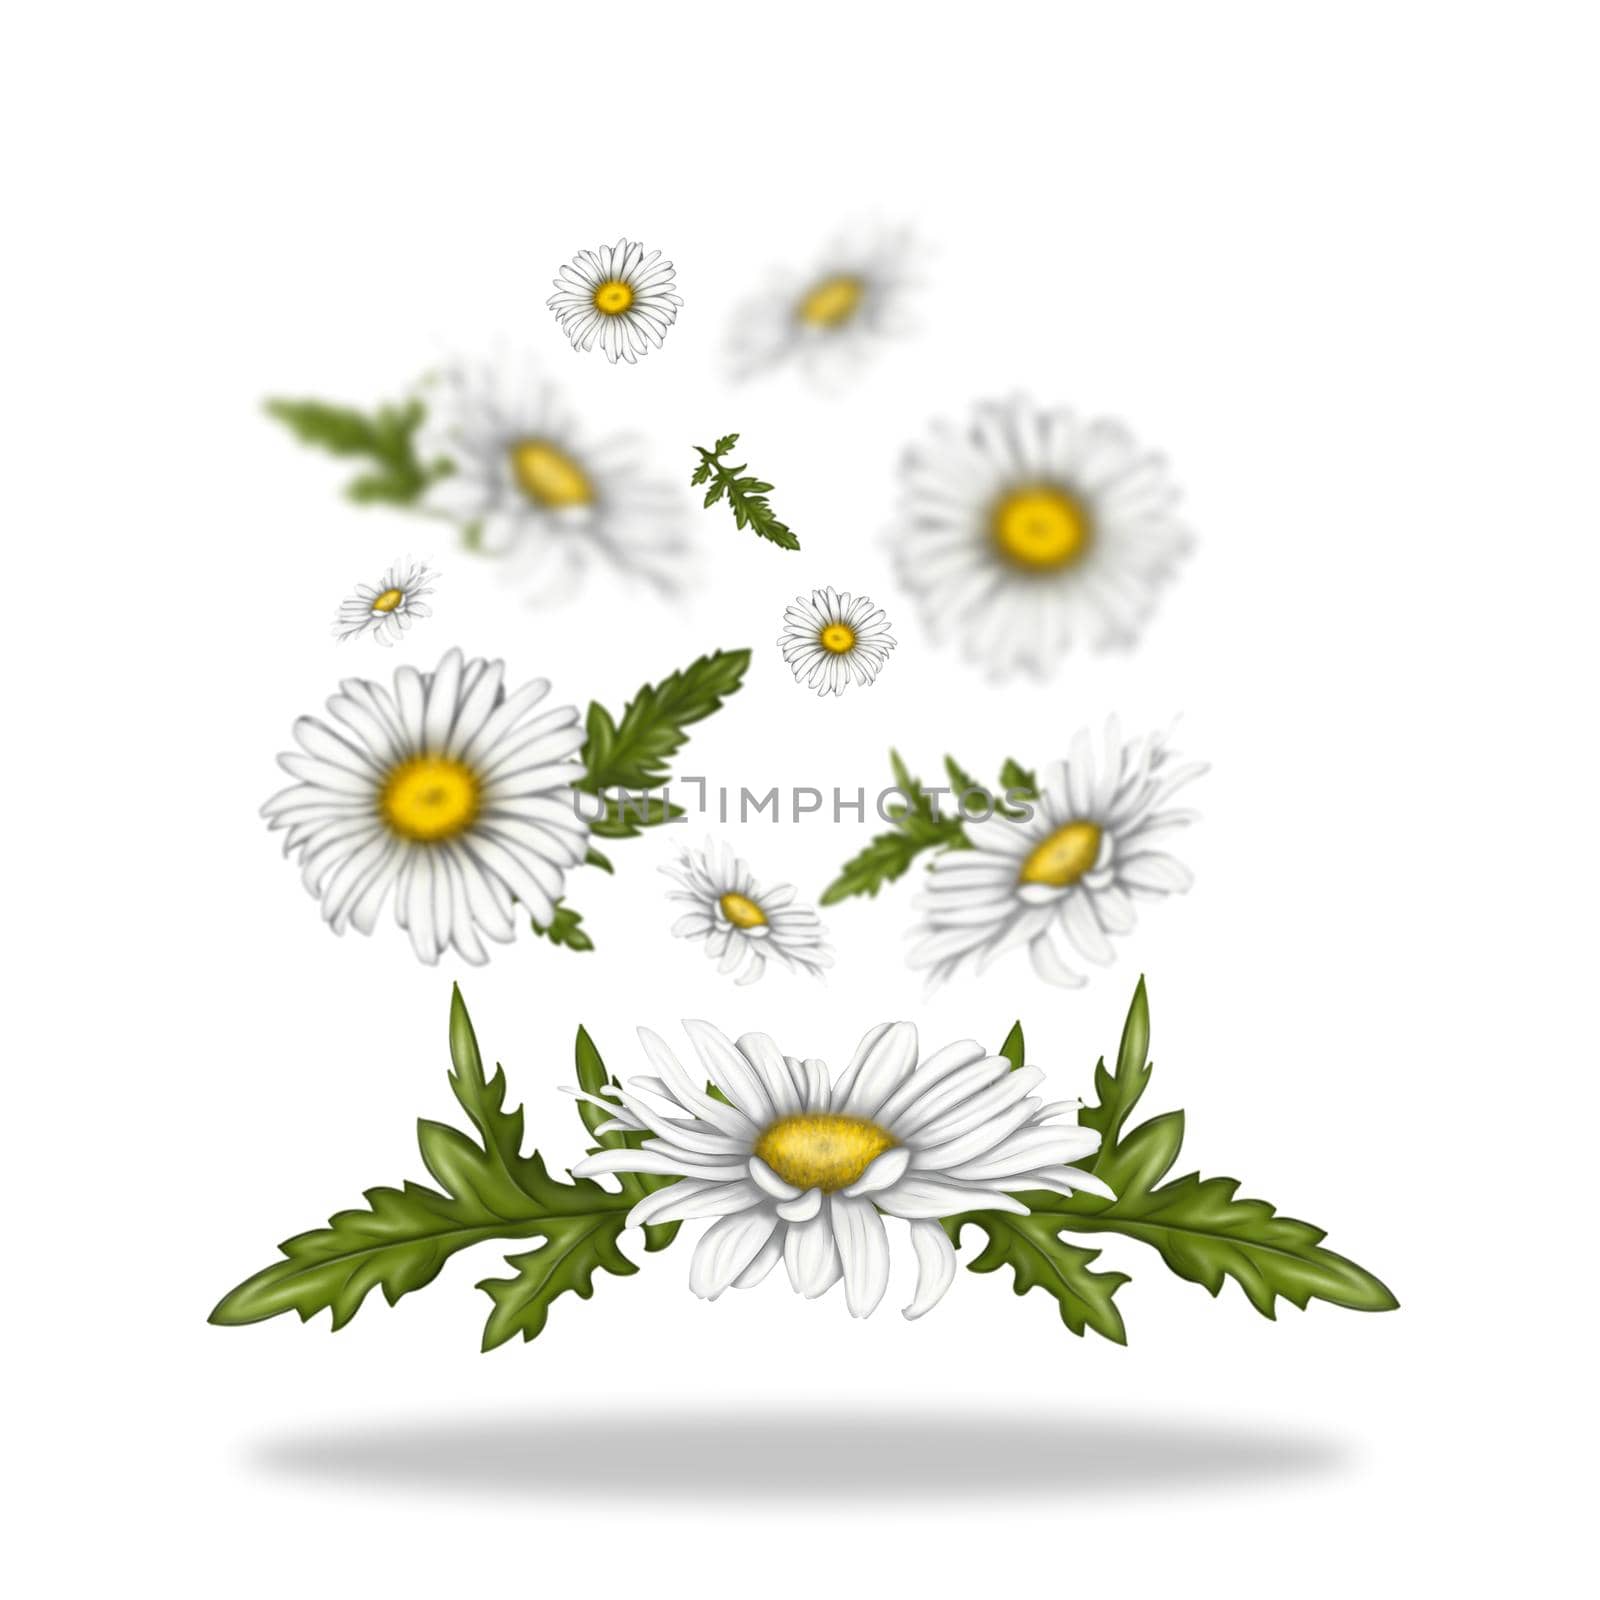 Illustration of chamomile flowers. Flowers float freely in space. White flowers on a light background.  by Alina_Lebed